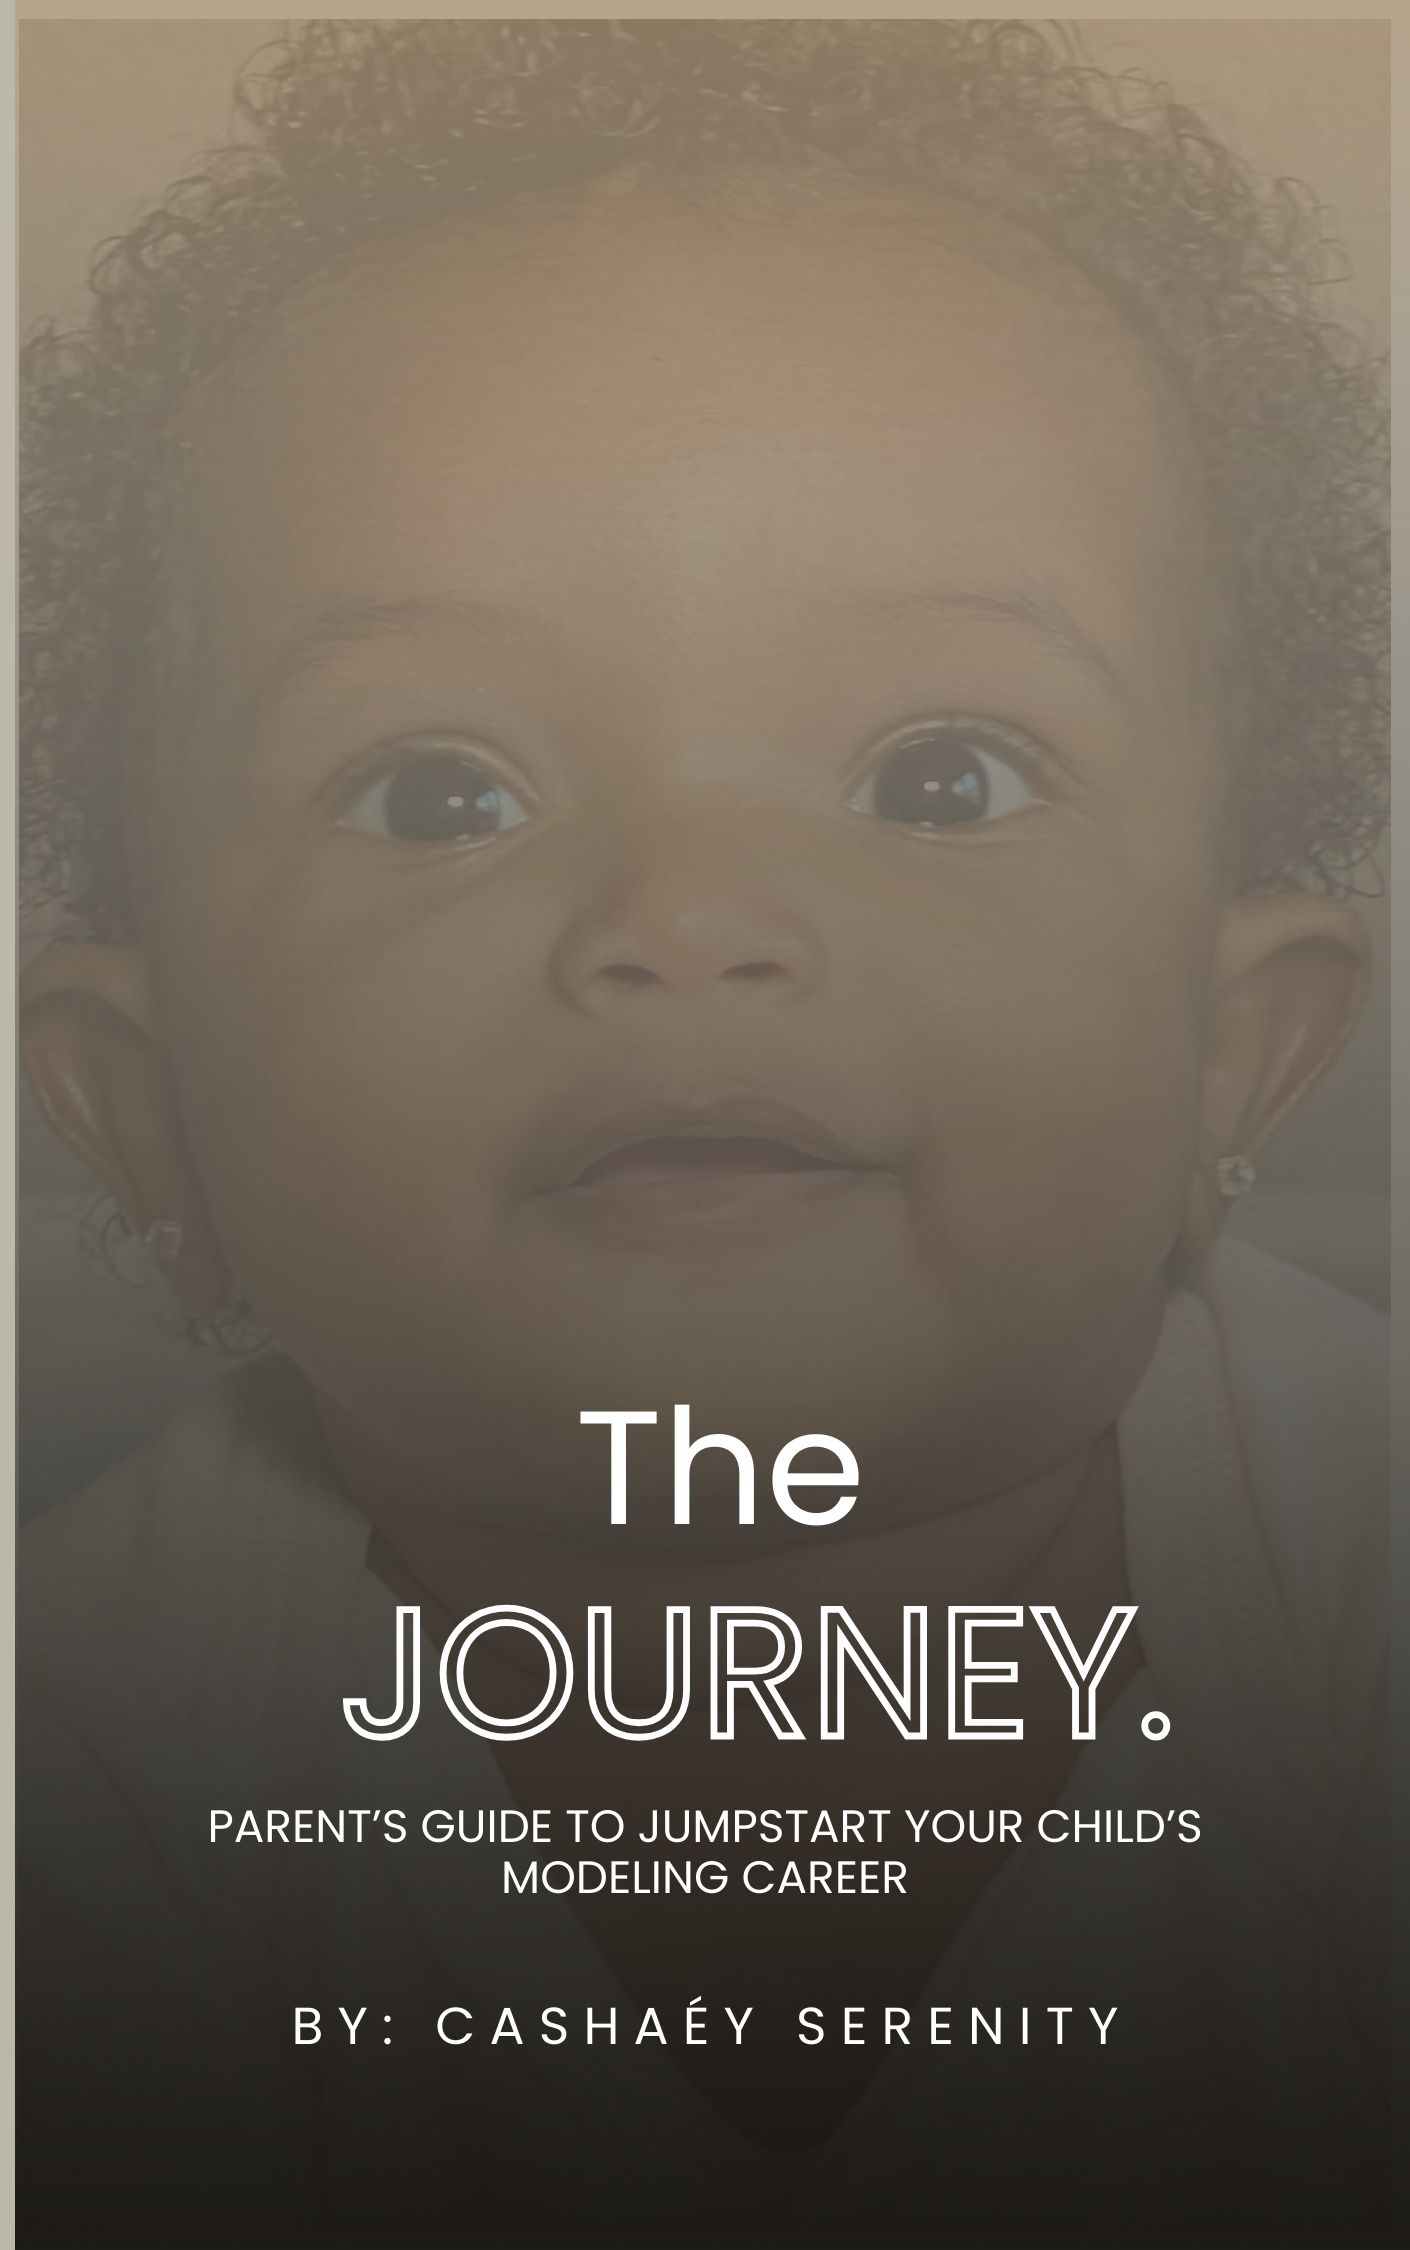 The Journey: Parent’s Guide to Jumpstart your Child’s Modeling Career